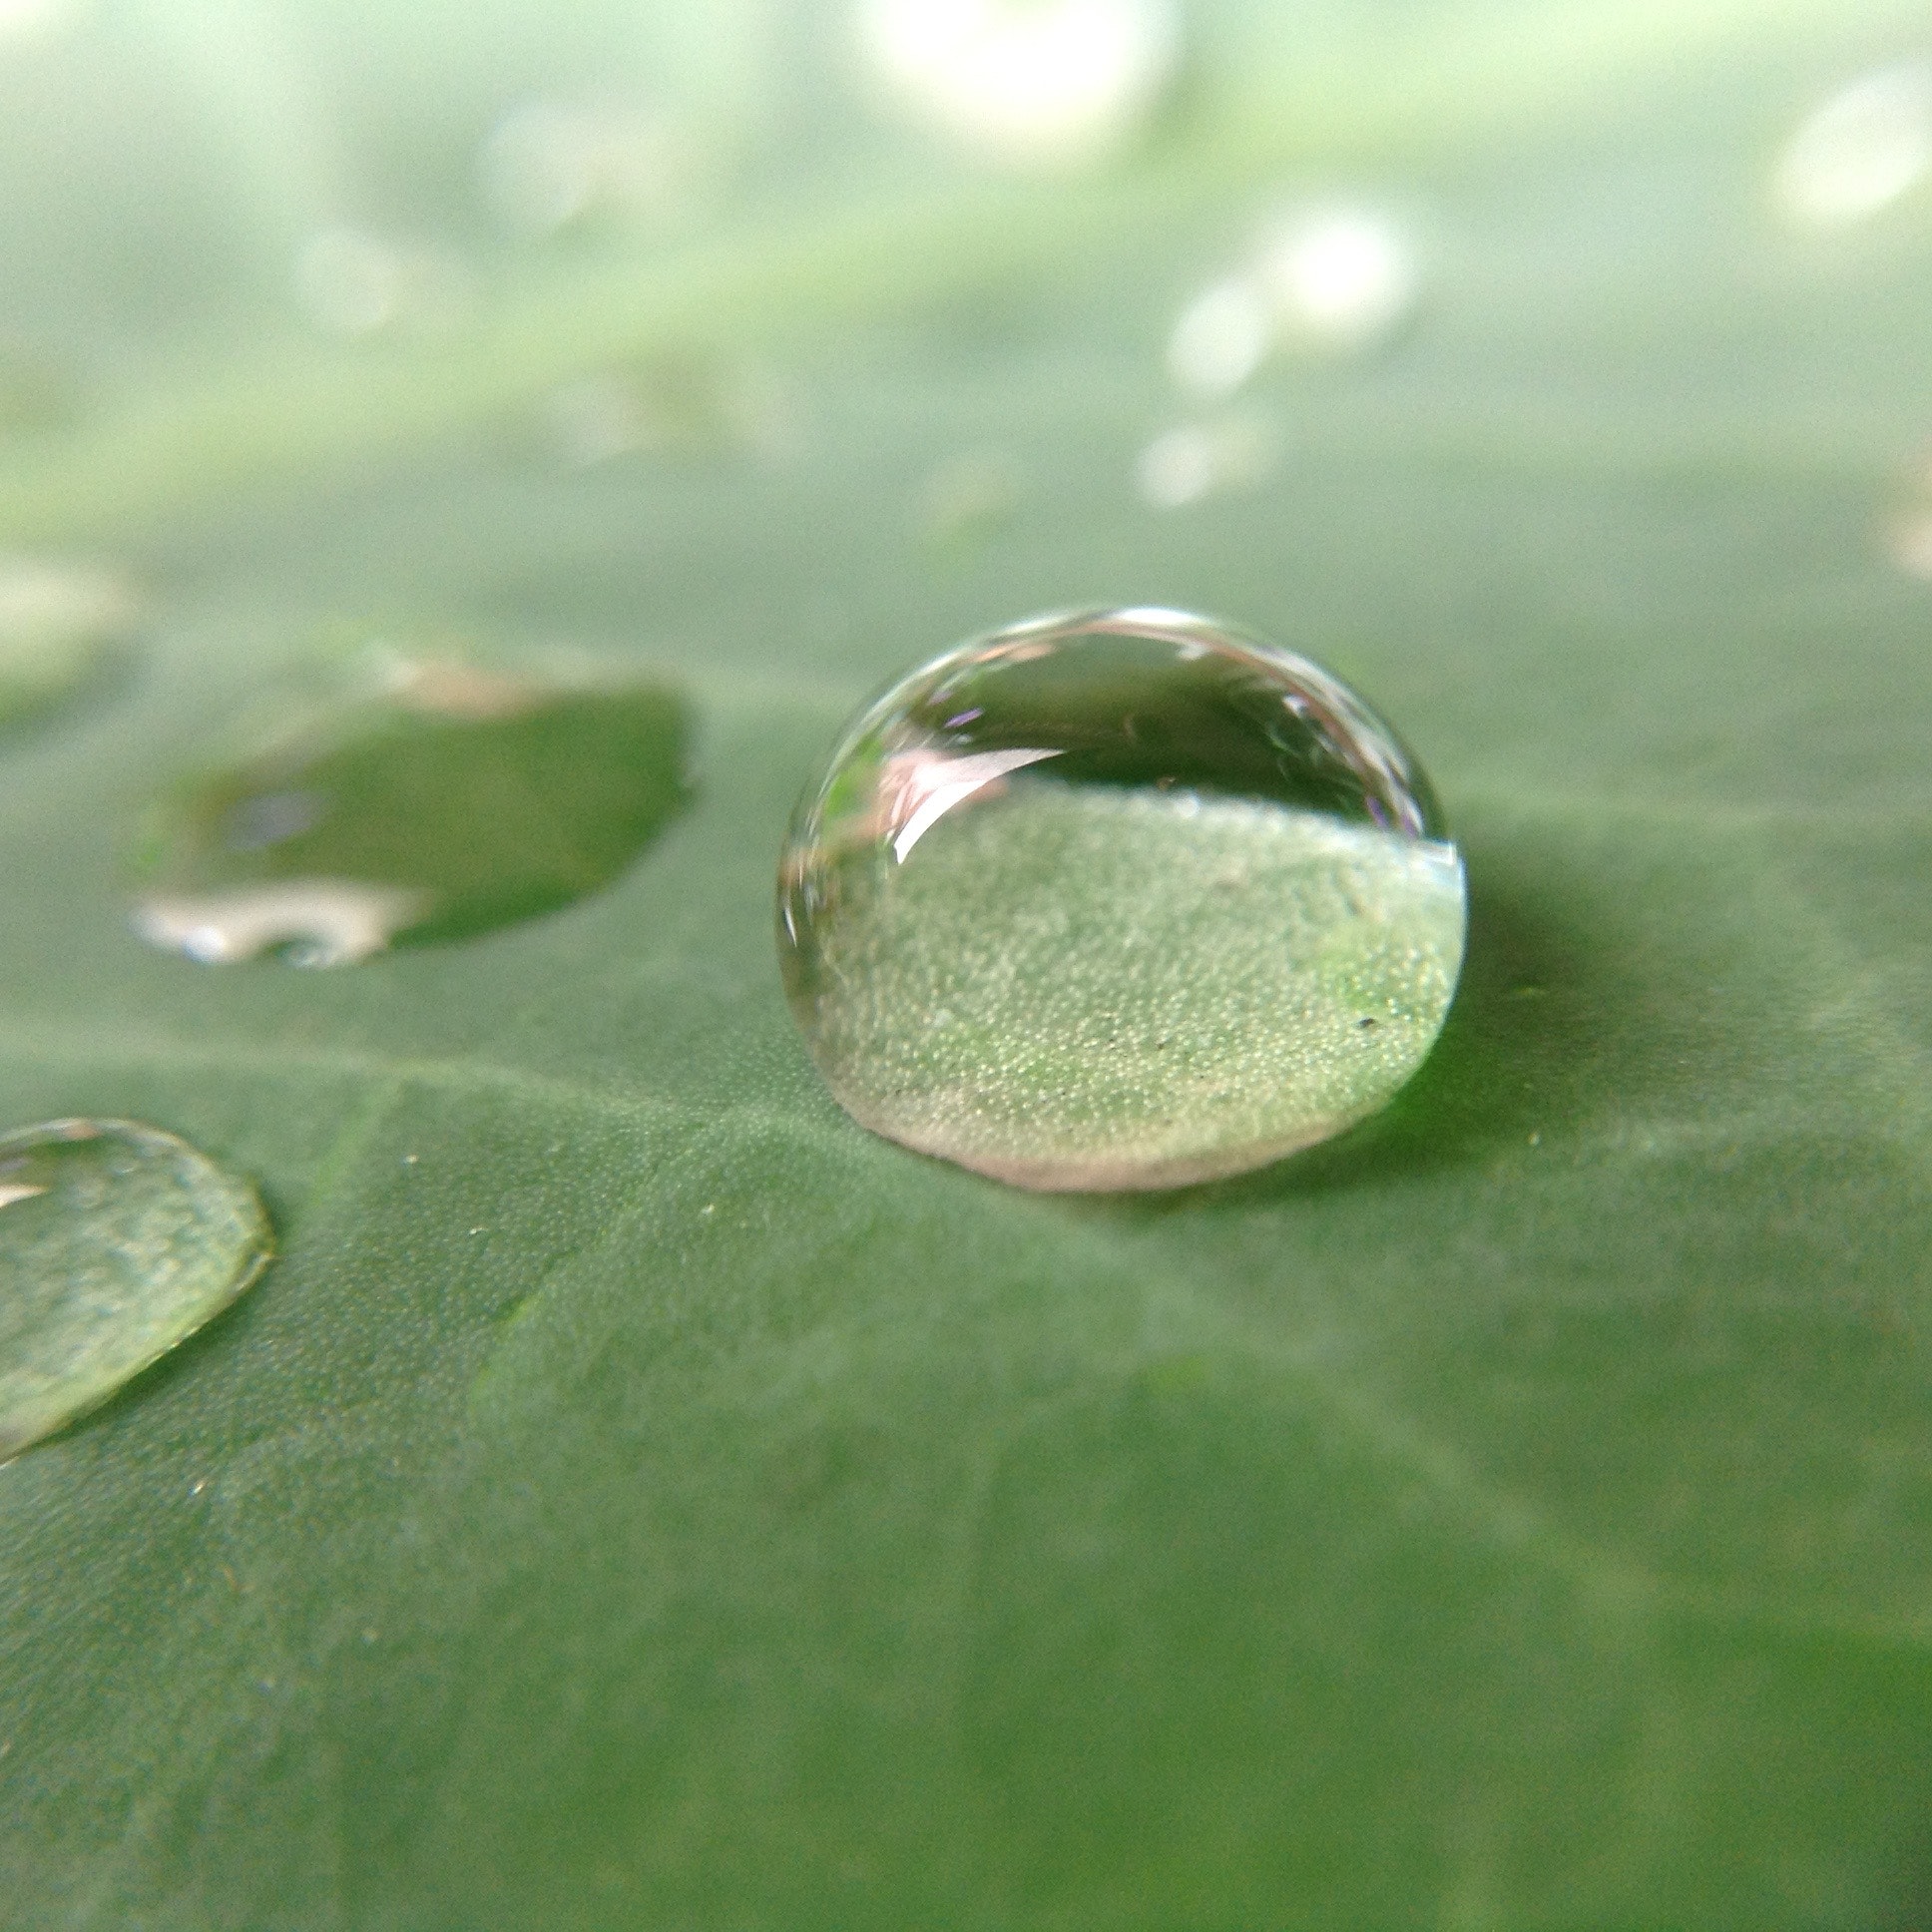 Free stock photo of drop of water, leaf, raindrop